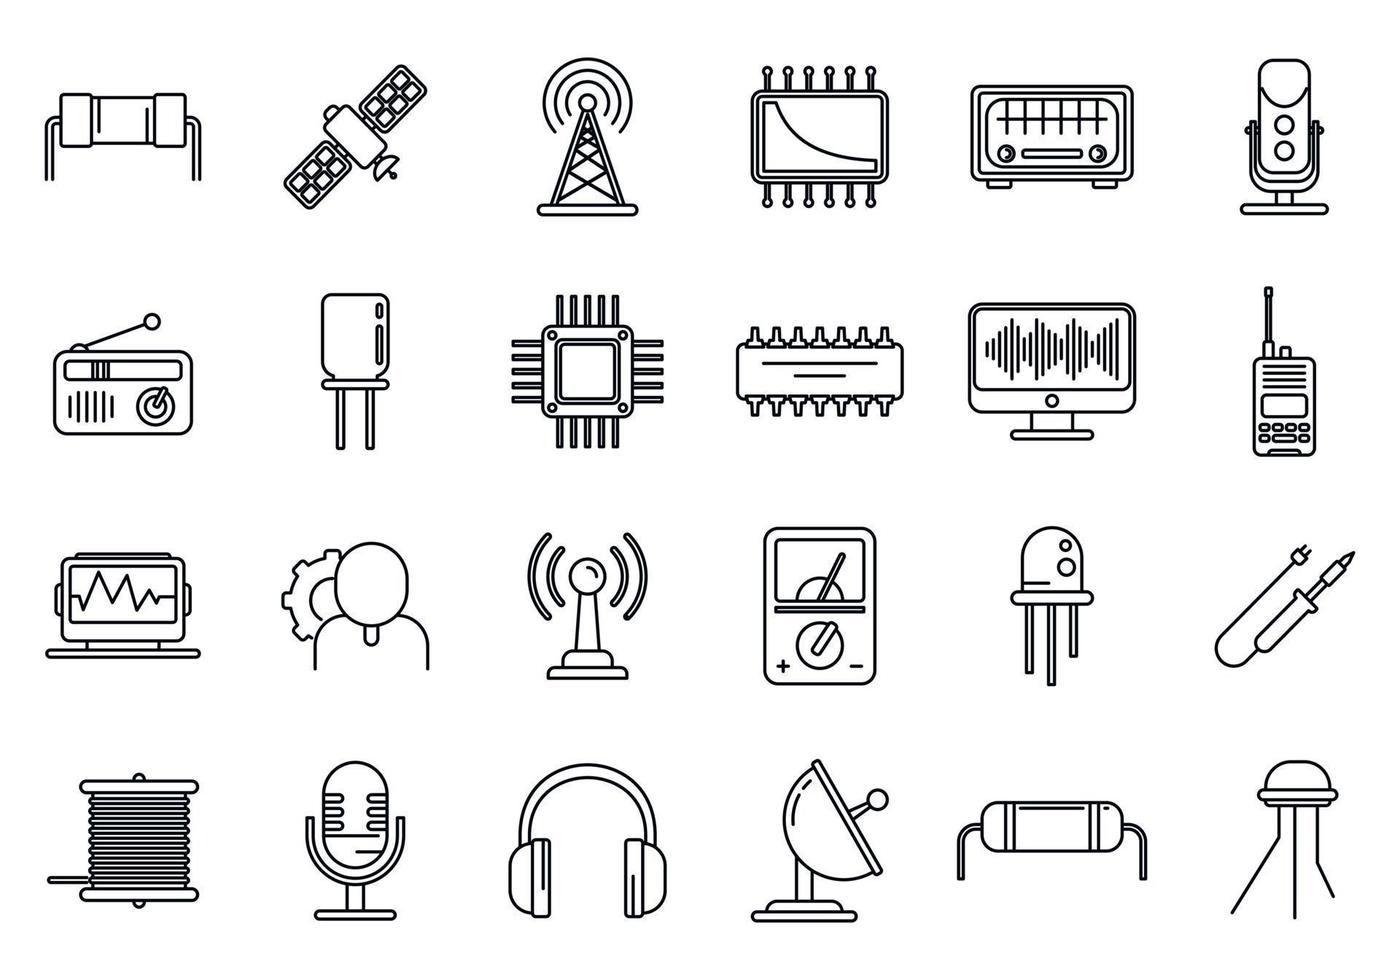 Radio engineer tool icons set, outline style vector